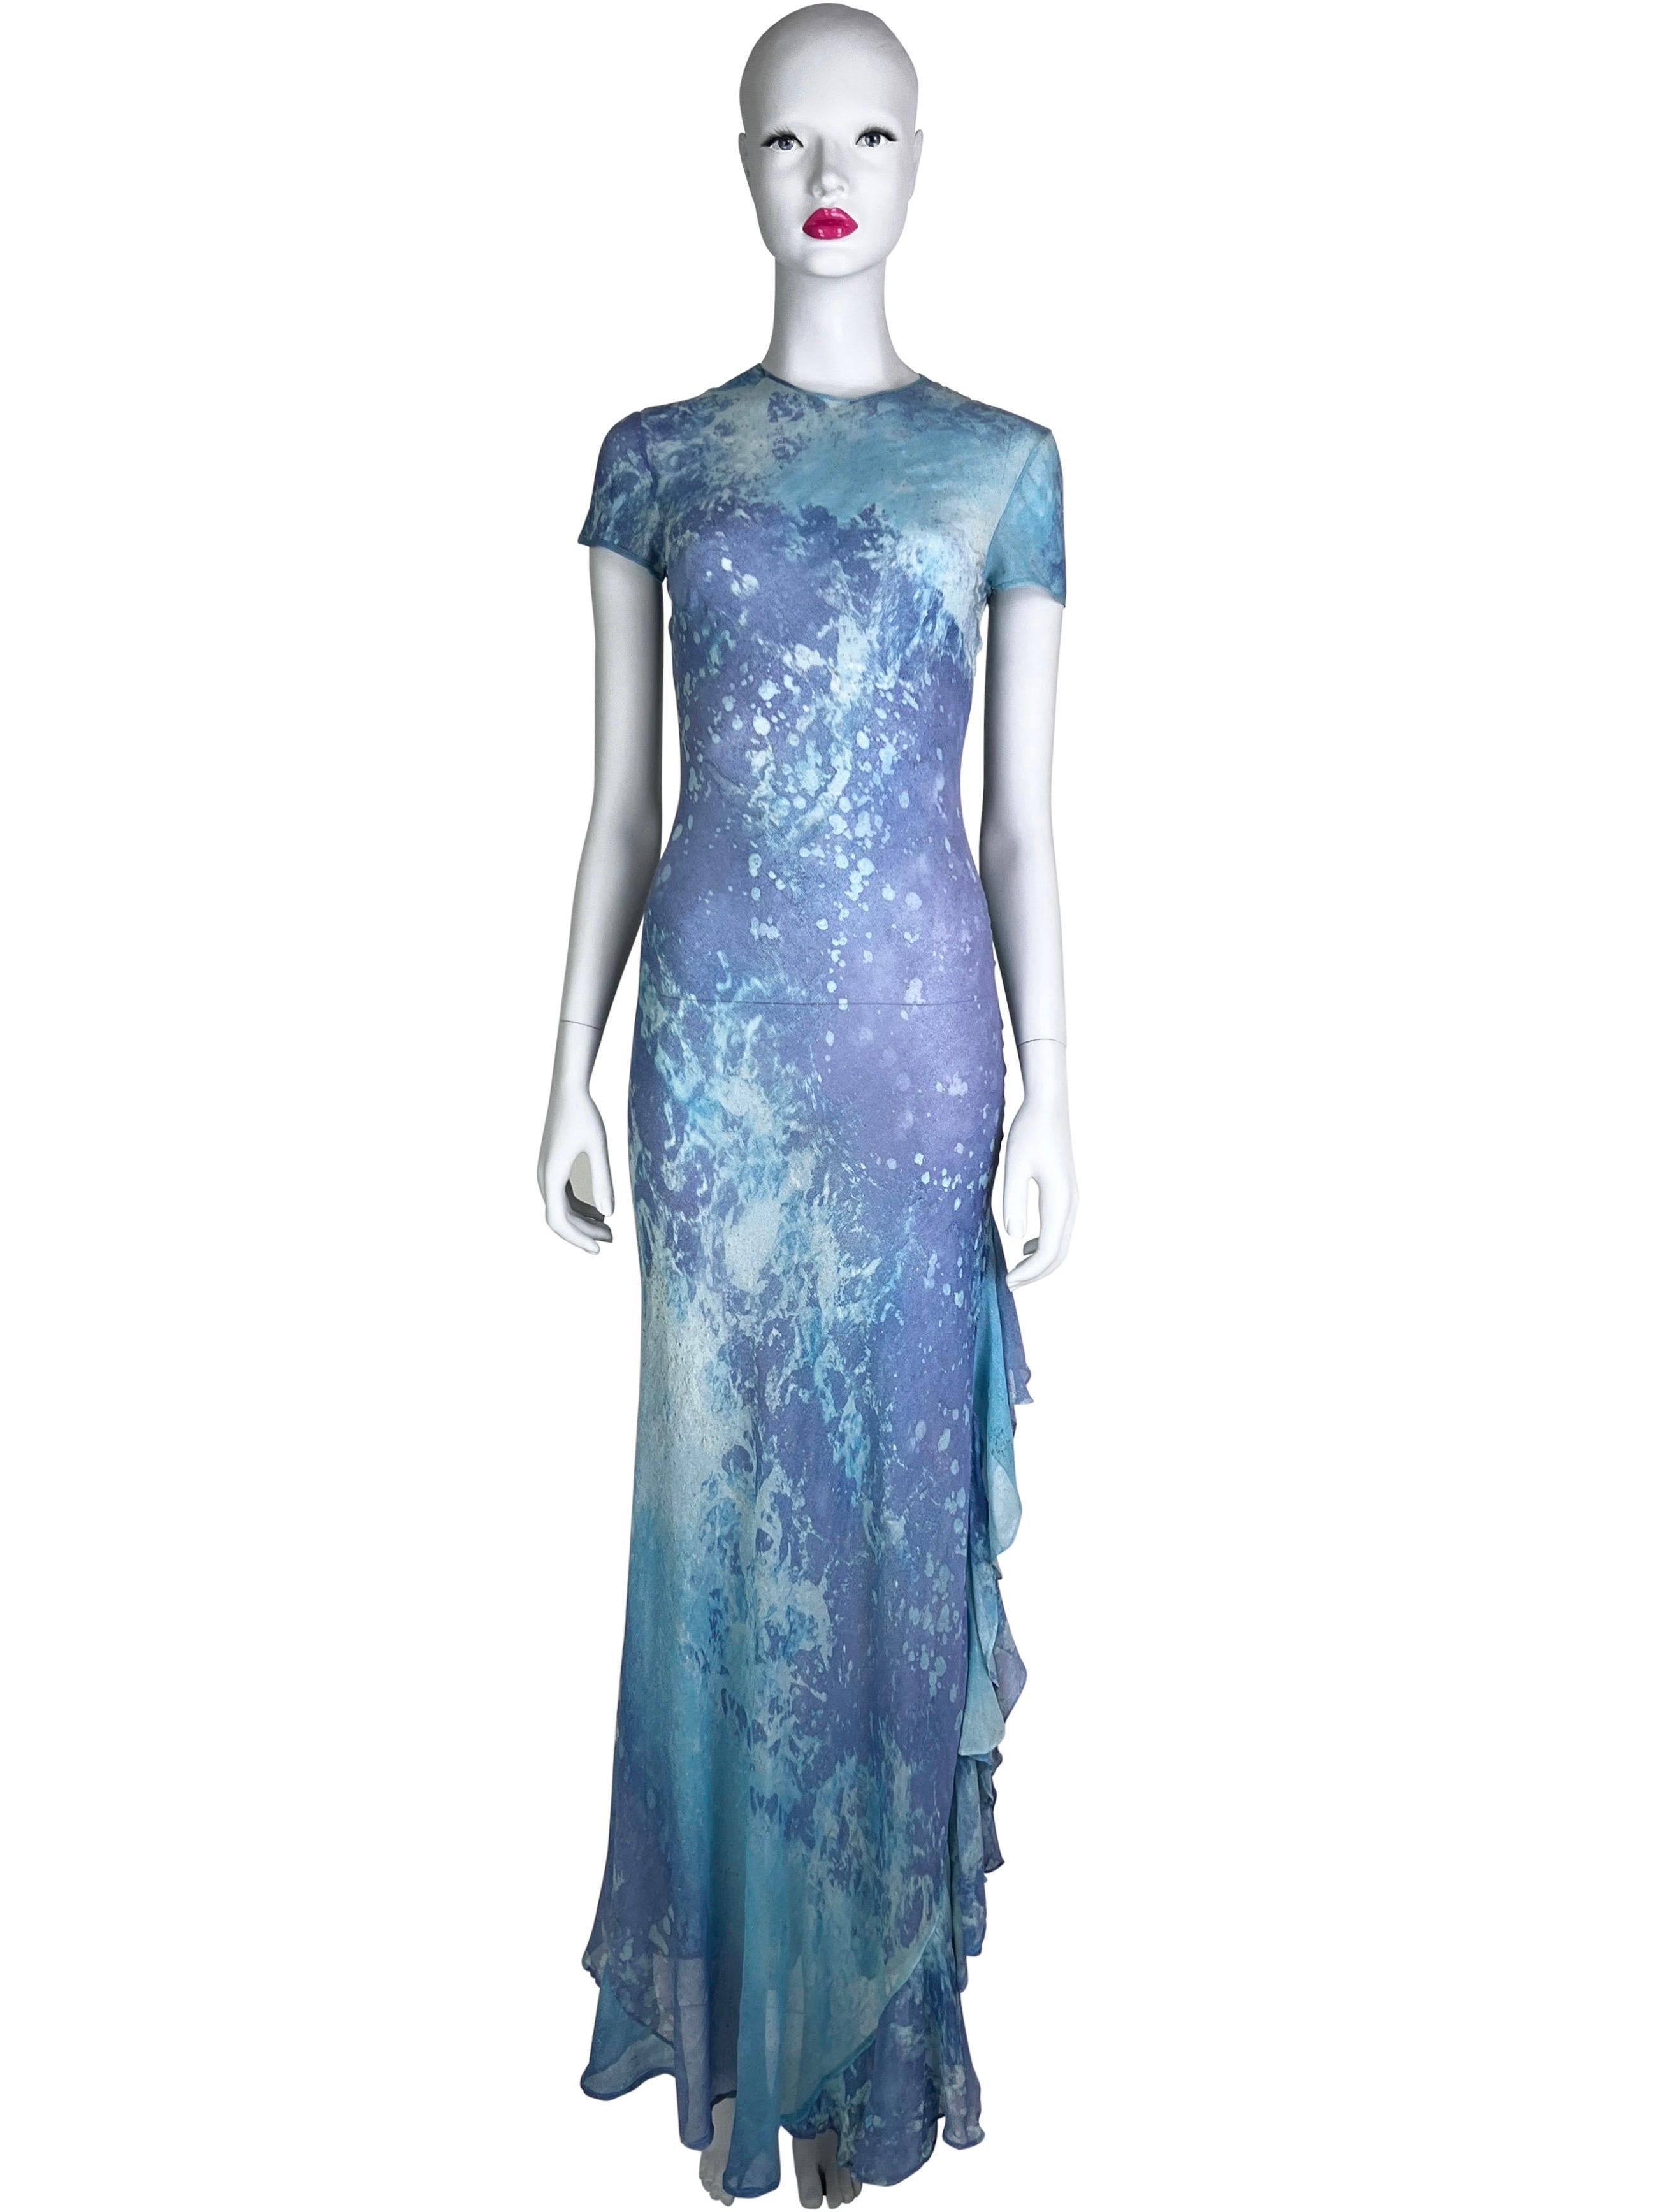 Spring 1999 Roberto Cavalli Watercolor Print Silk Gown For Sale 3